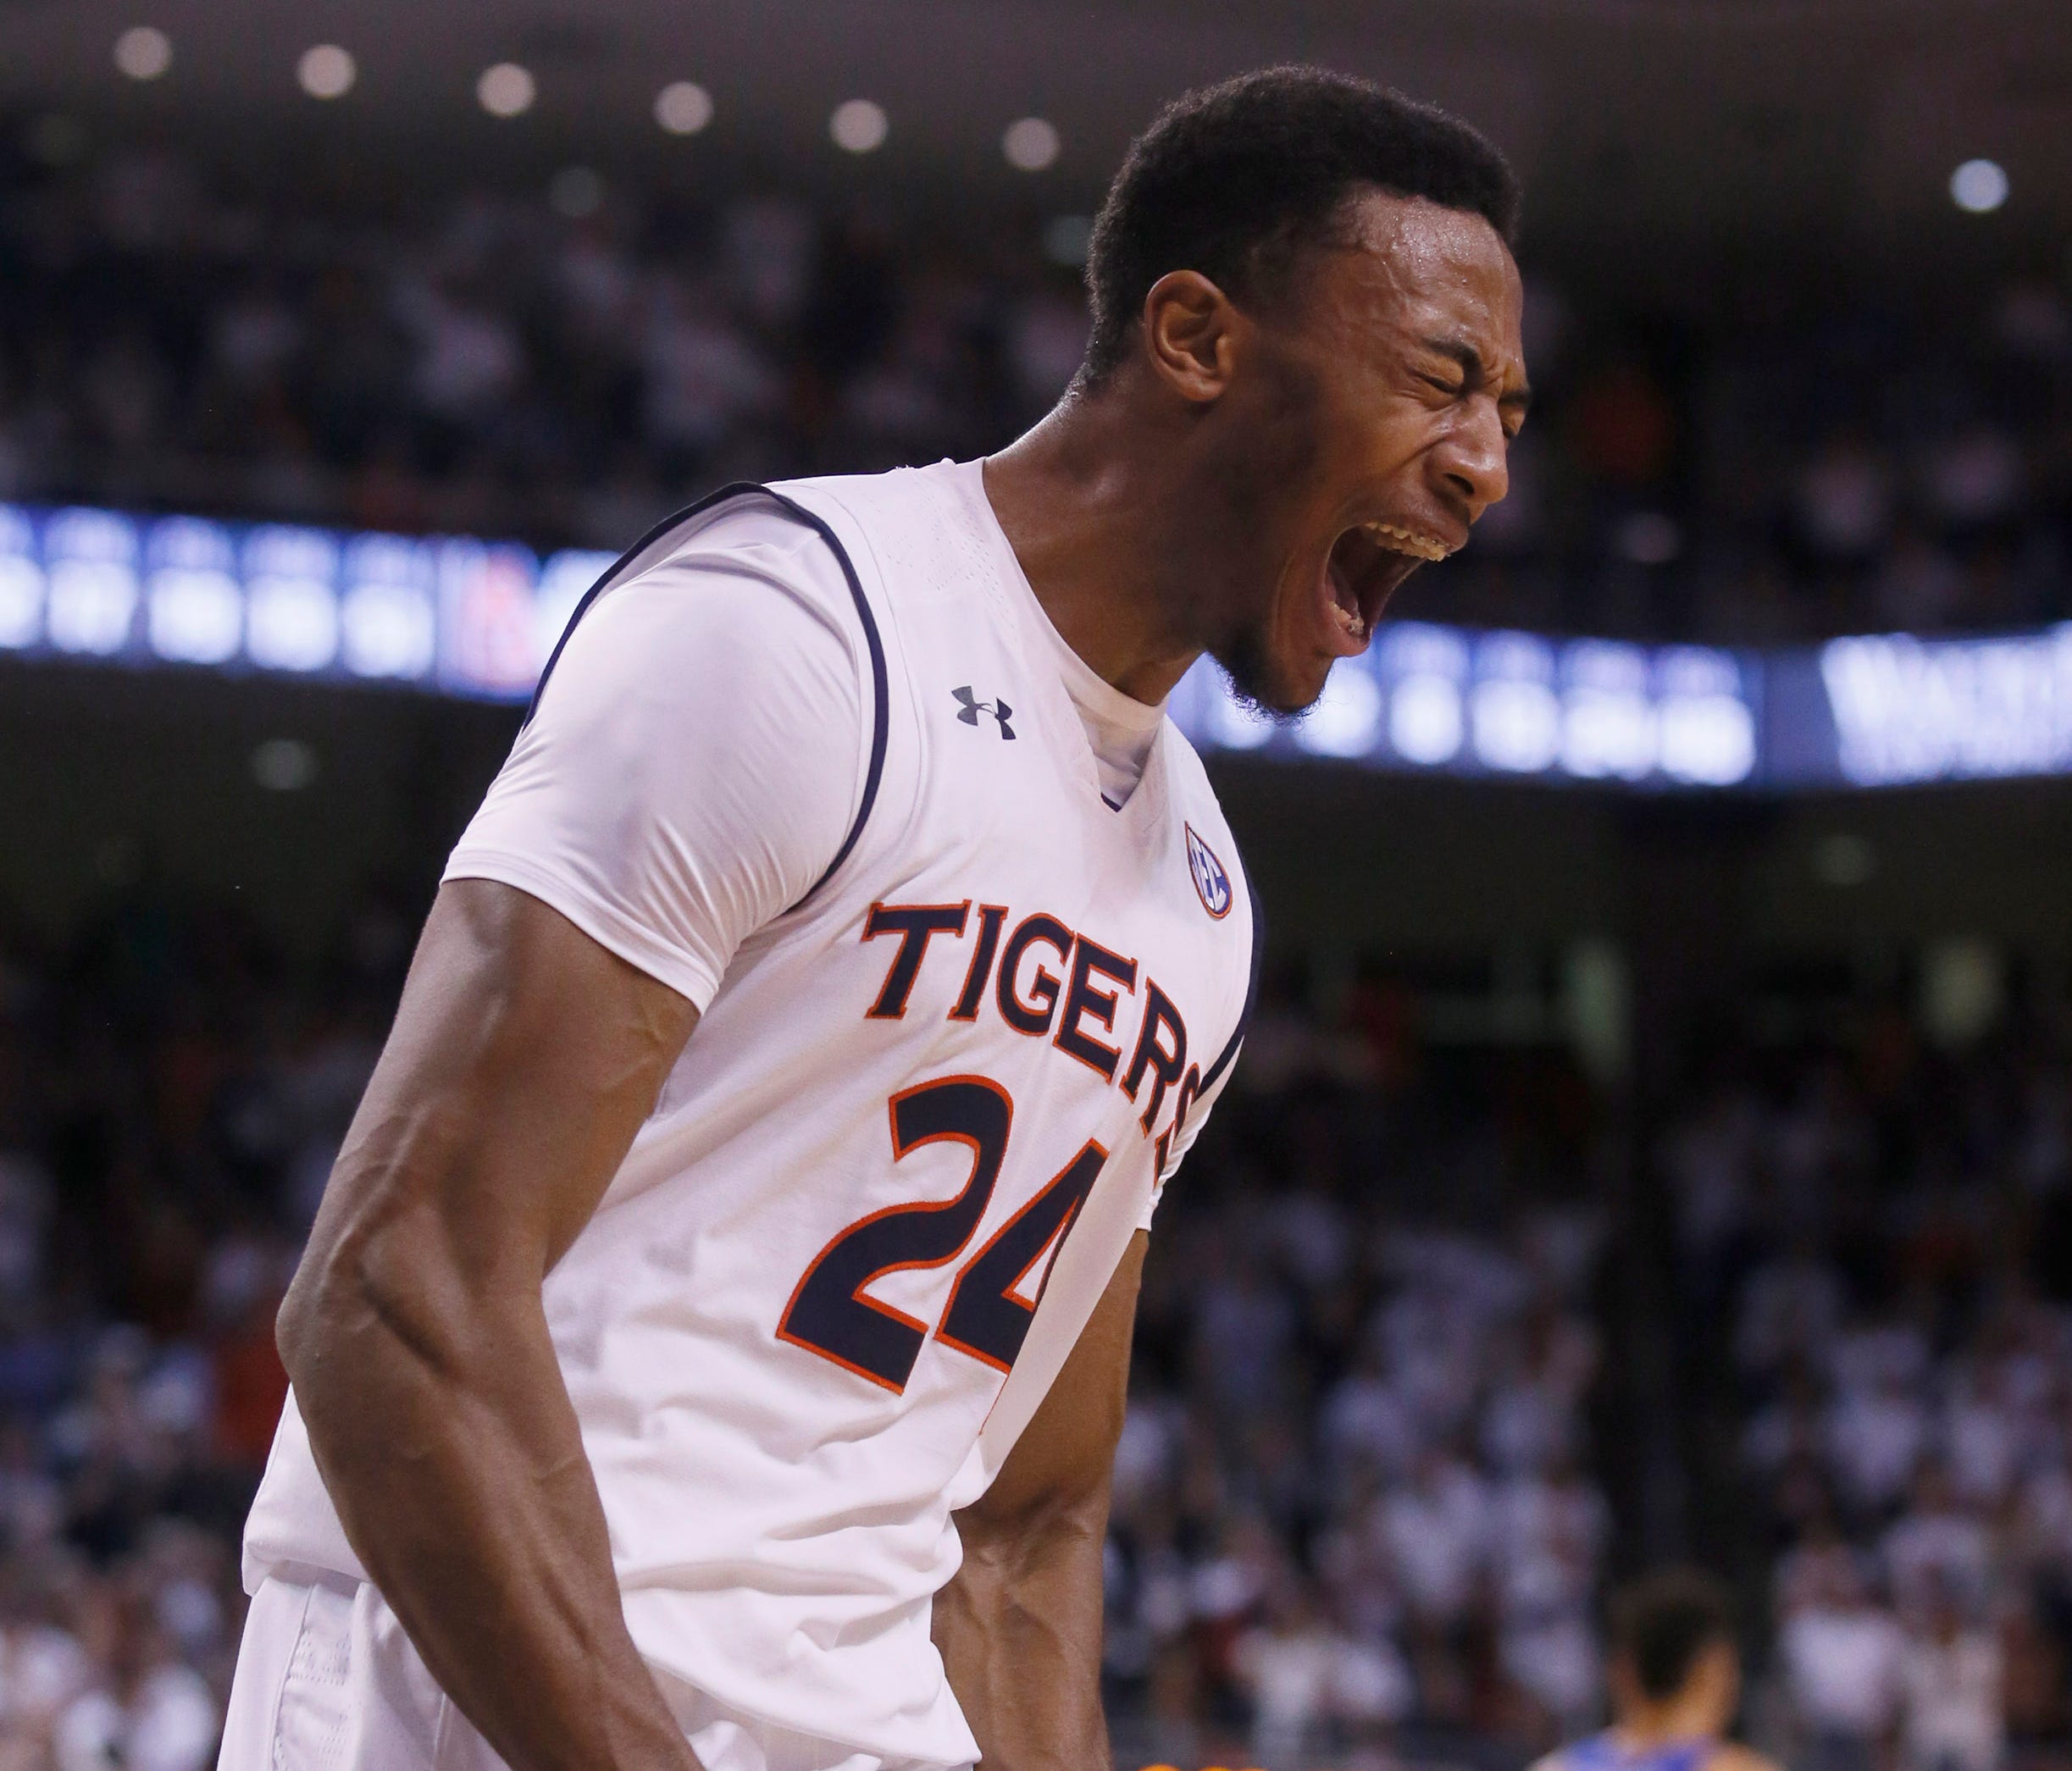 Auburn Tigers forward Anfernee McLemore (24) reacts after being fouled by the Kentucky Wildcats during the second half at Auburn Arena.  The Tigers beat the Wildcats 76-66.